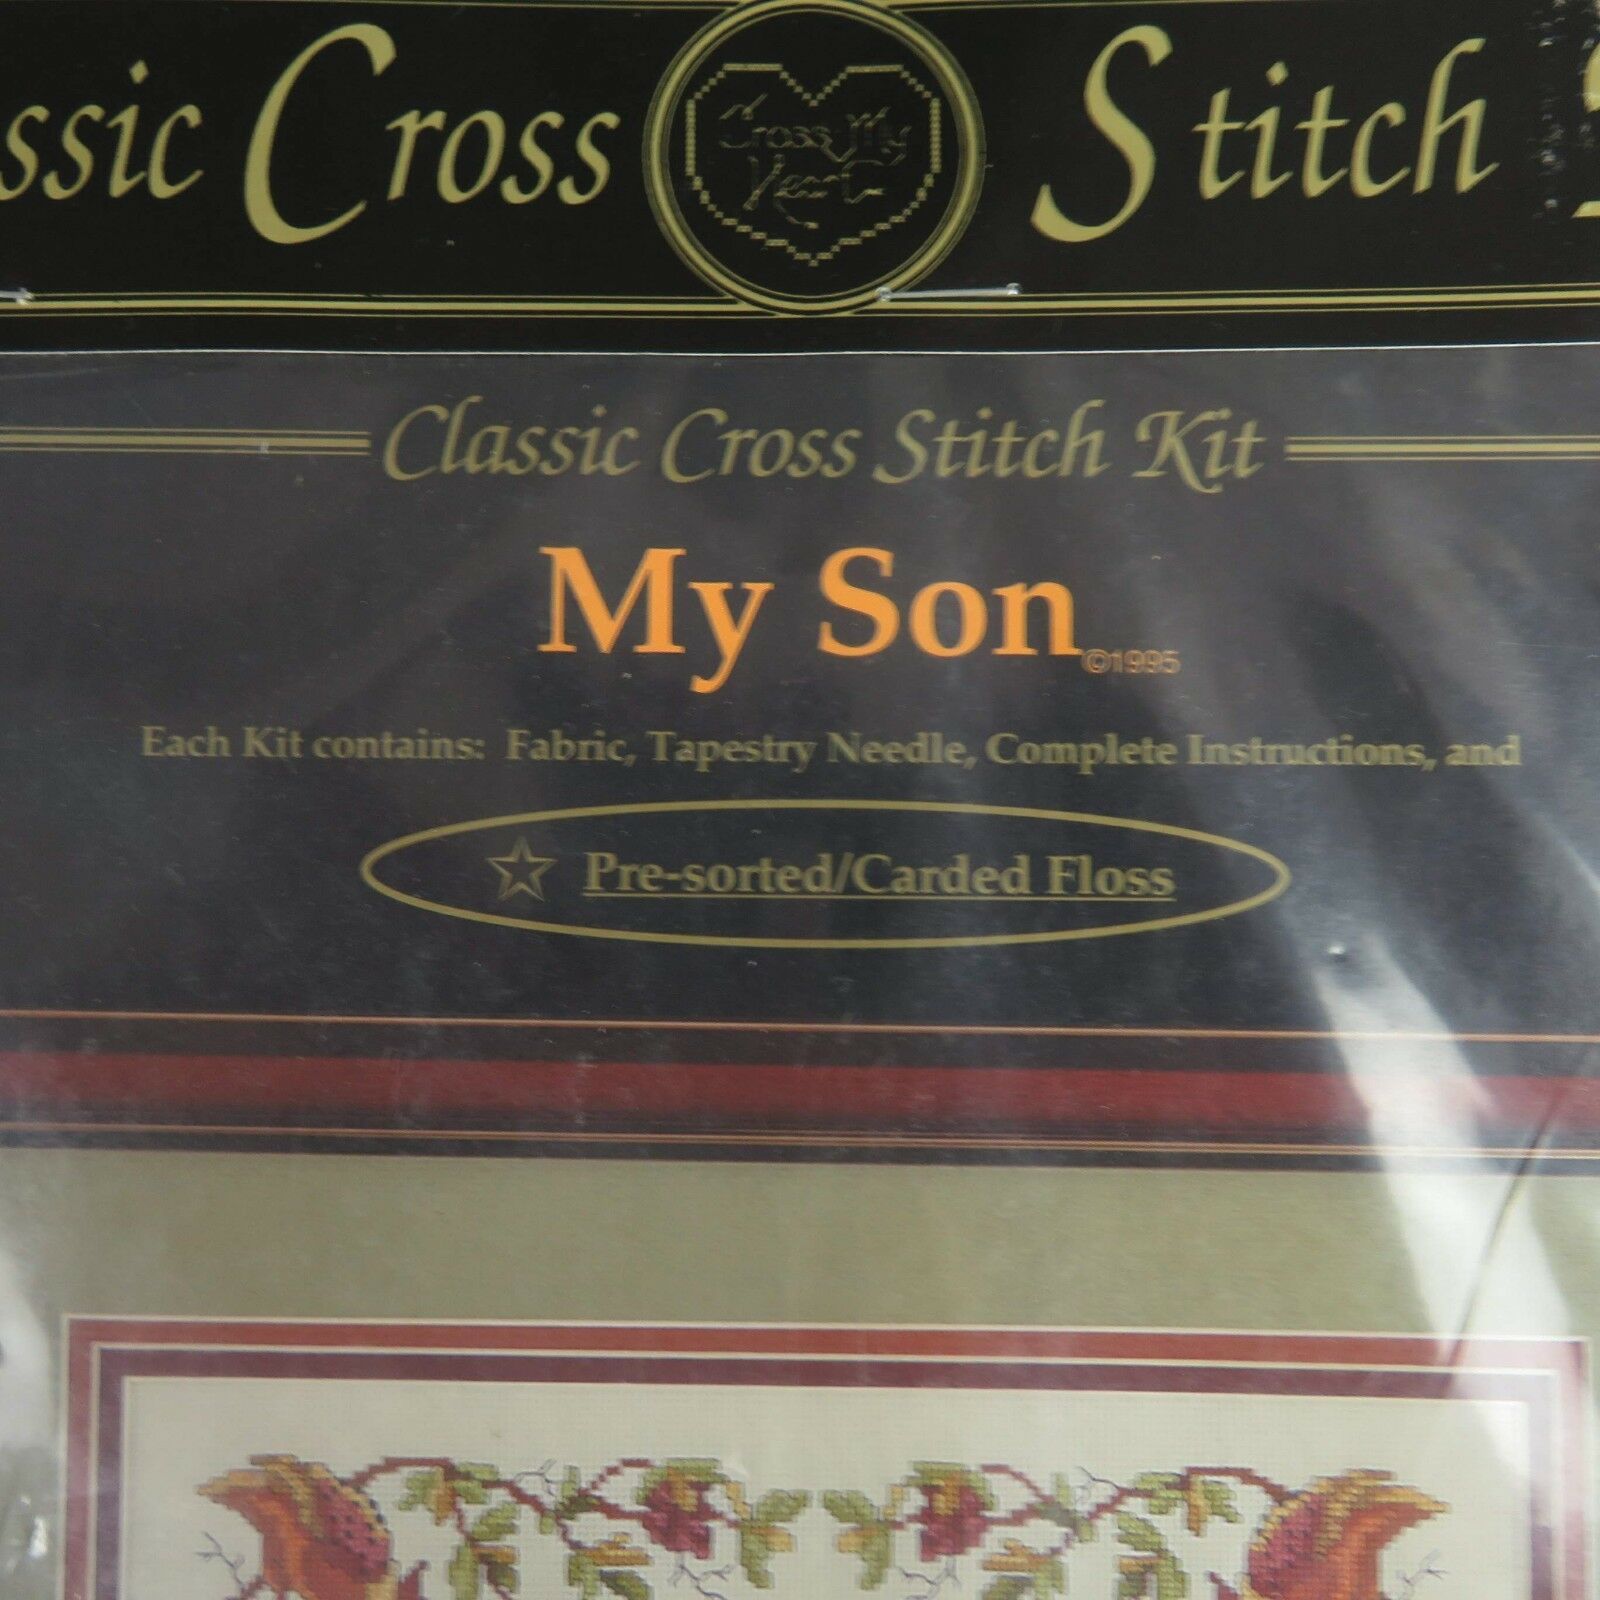 My Son Classic Cross Stitch Kit Tapestry Needlepoint Embroidery Cross My Heart - At Grandma's Table